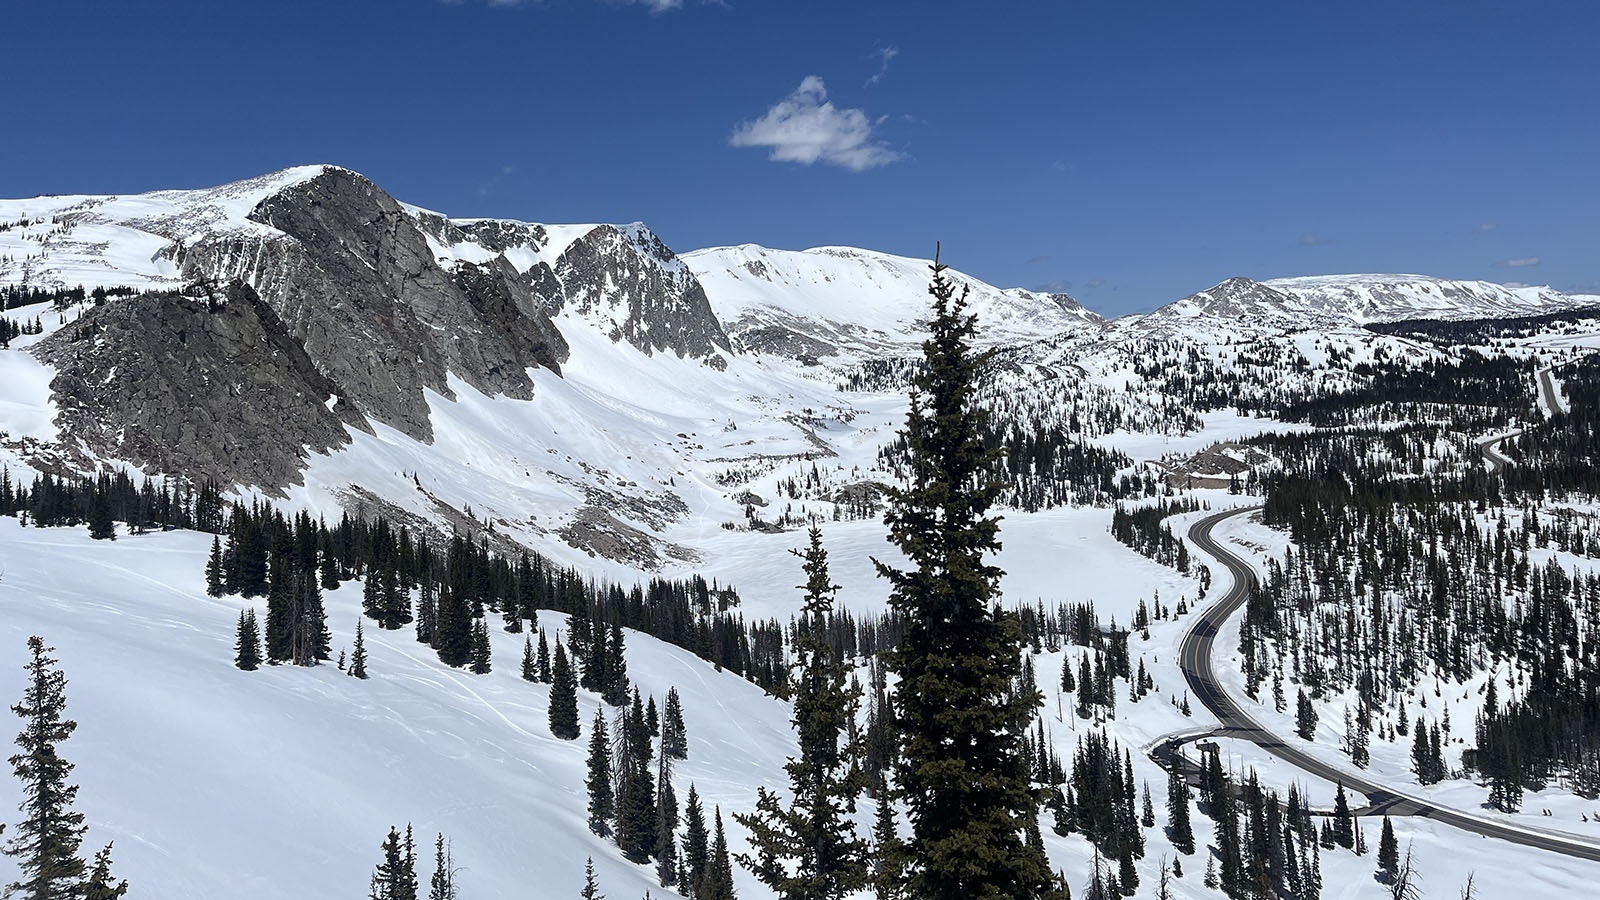 The Snowy Range offers a wide range of backcountry options well into the summer months for hardcore skiers and snowboarders that aren't quite ready to hang it up for the season.